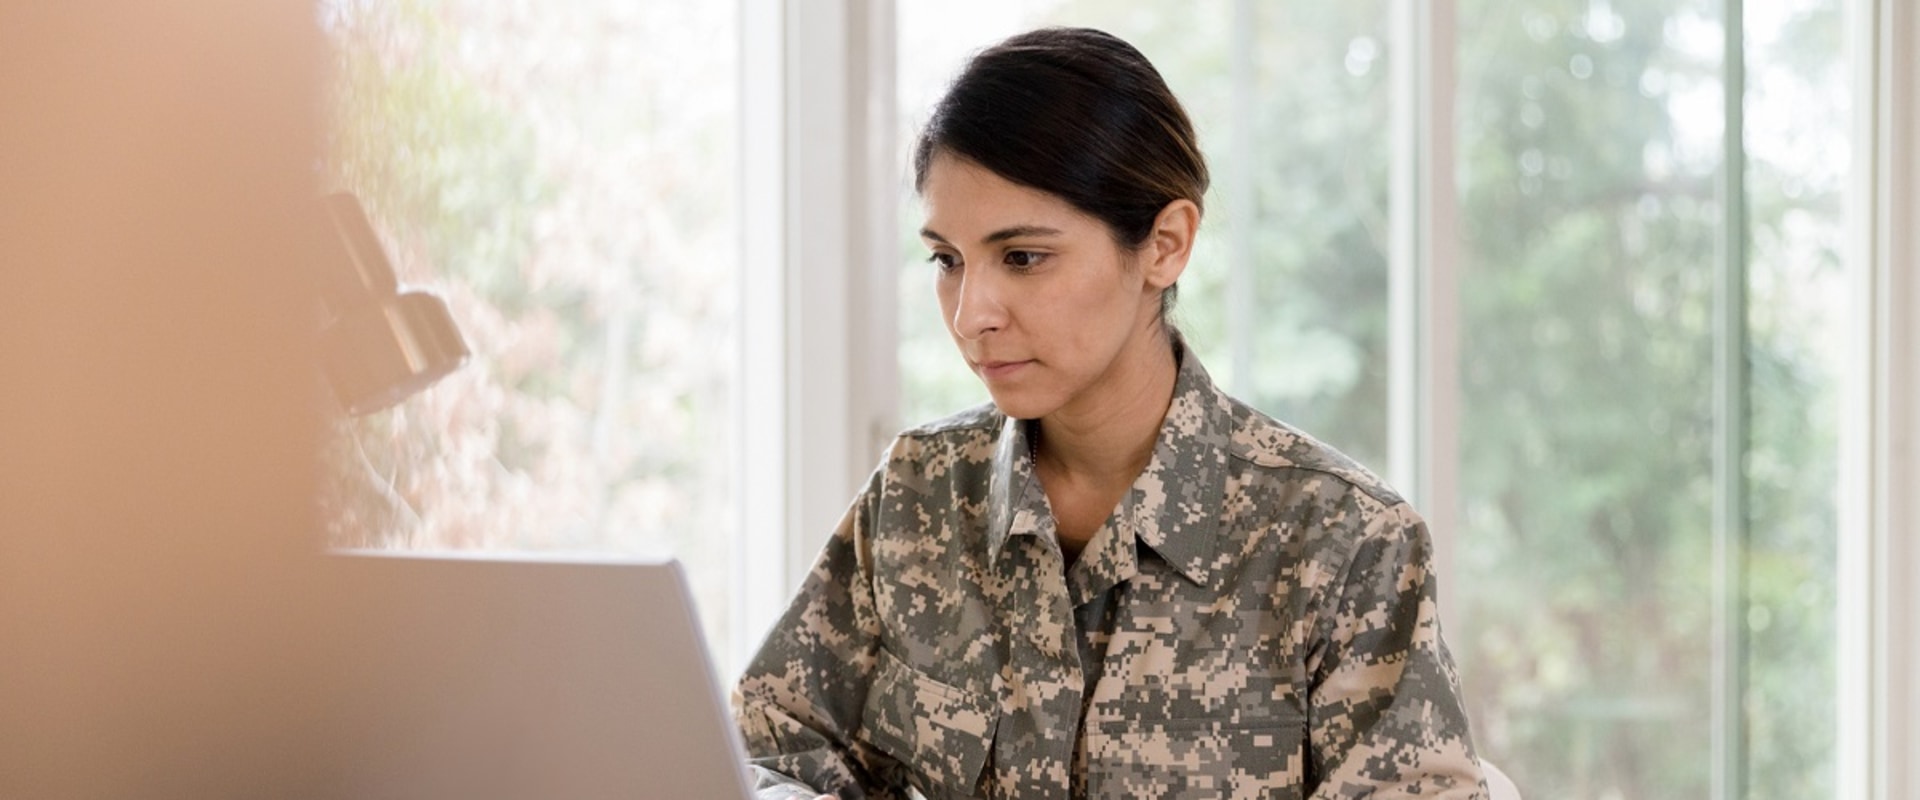 Can you get a va loan if you served less than 2 years?